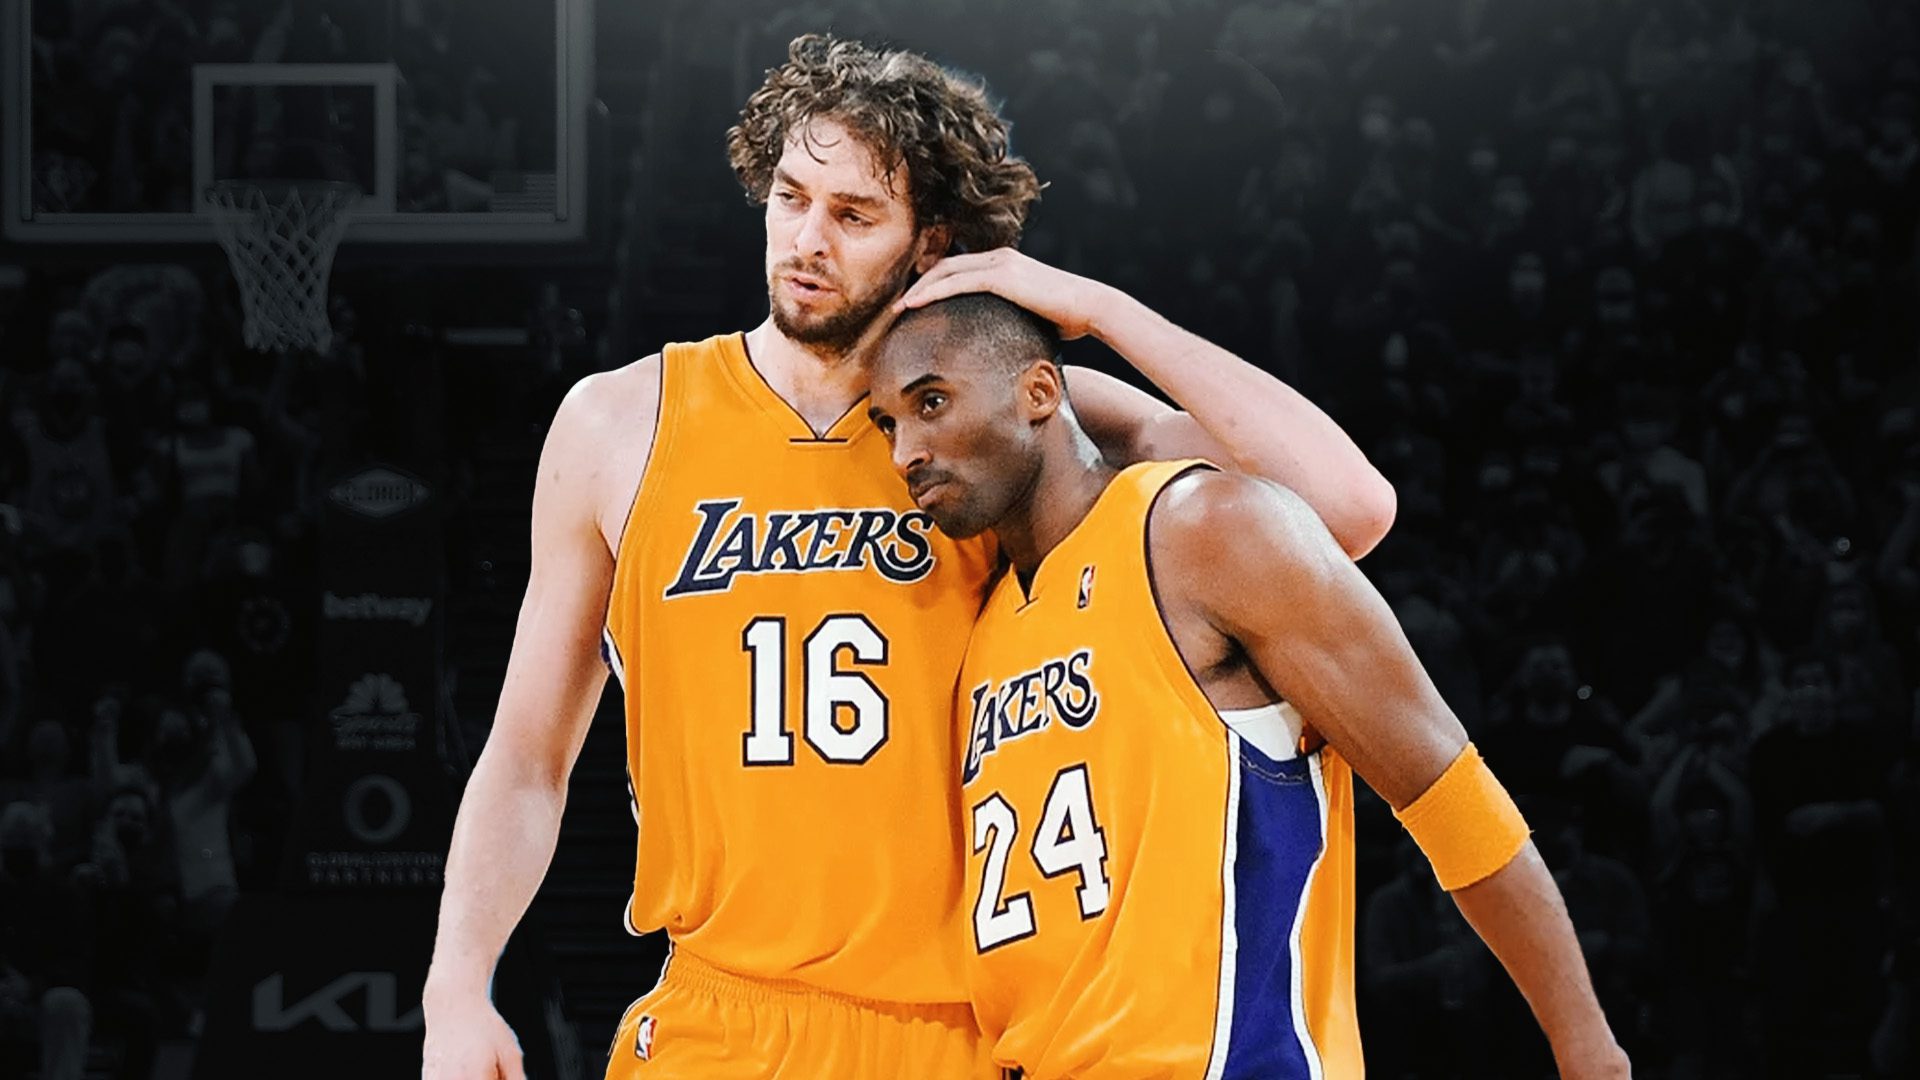 Pau Gasol Explains Why He and Kobe Bryant Meshed So Well On and Off the Court